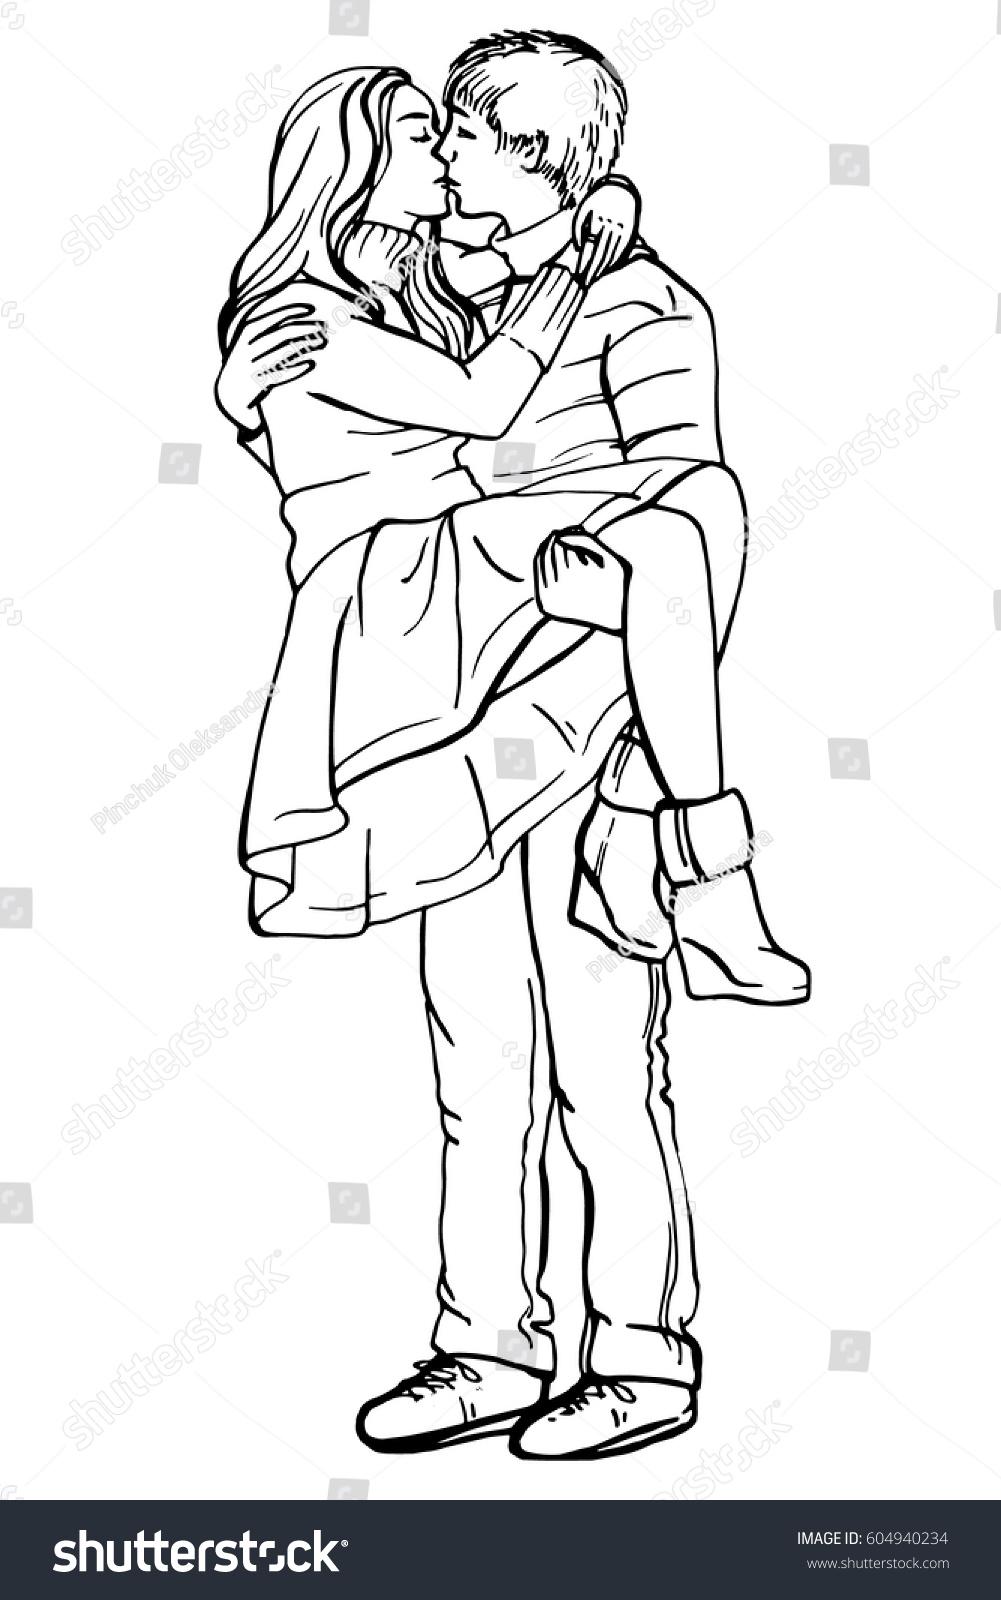 Young couple in love.Sensual Ink sketch portrait of young stylish couple. Embraces of a loving couple, couple hugging and flirting, kissing. Hand drawn illustration.